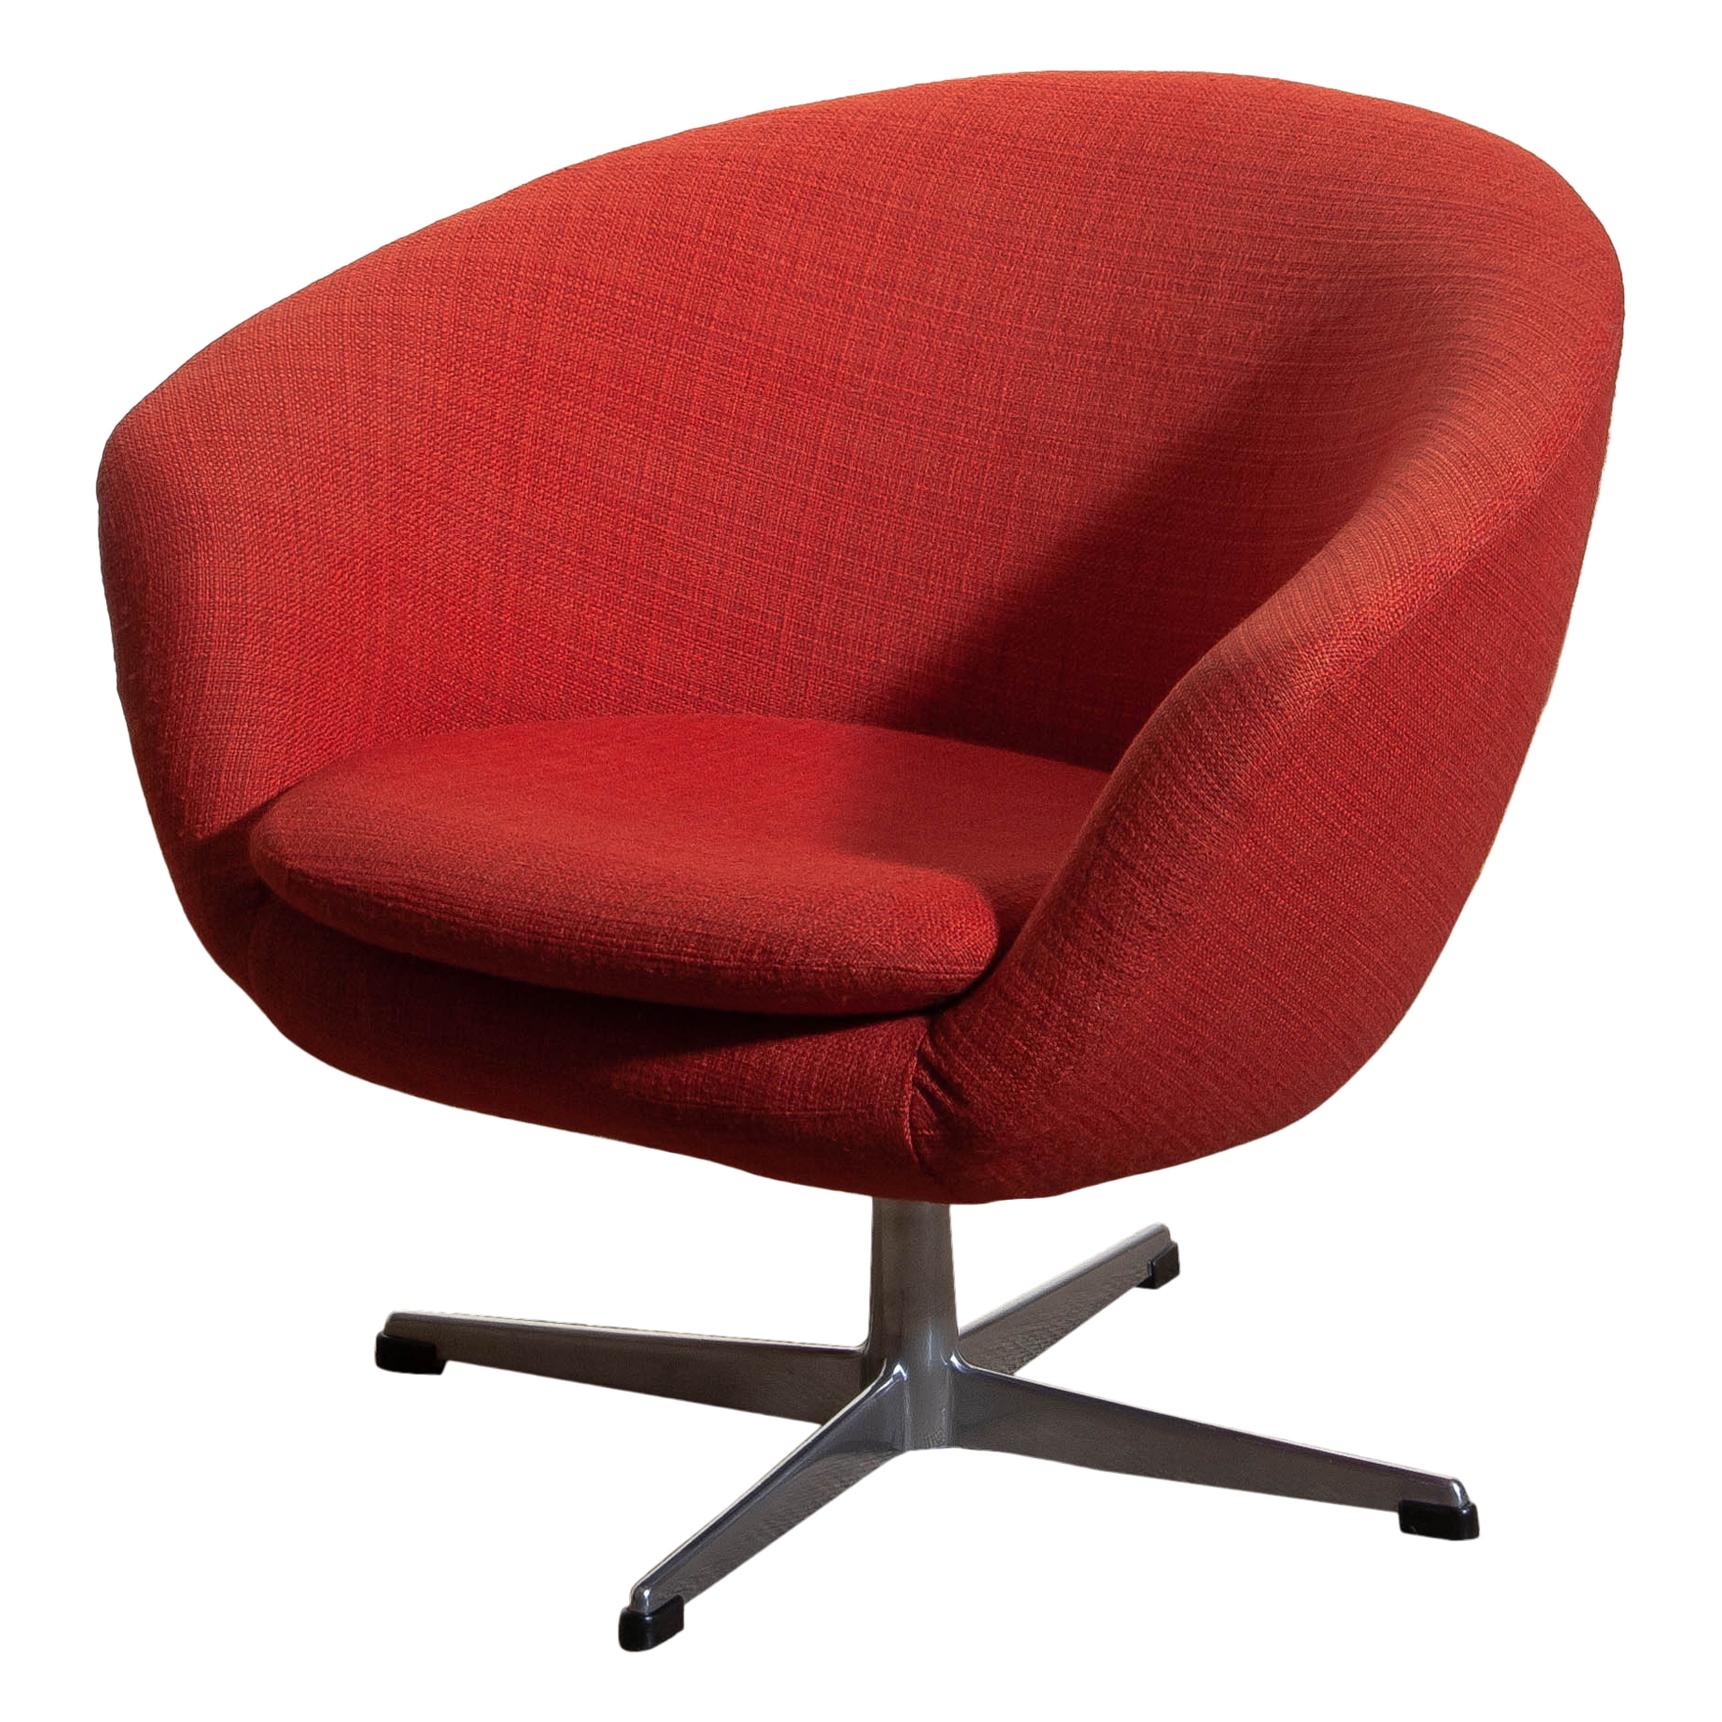 Mid-Century Modern 1960s, Swivel Lounge Chair by Carl Eric Klote for Overman, Denmark